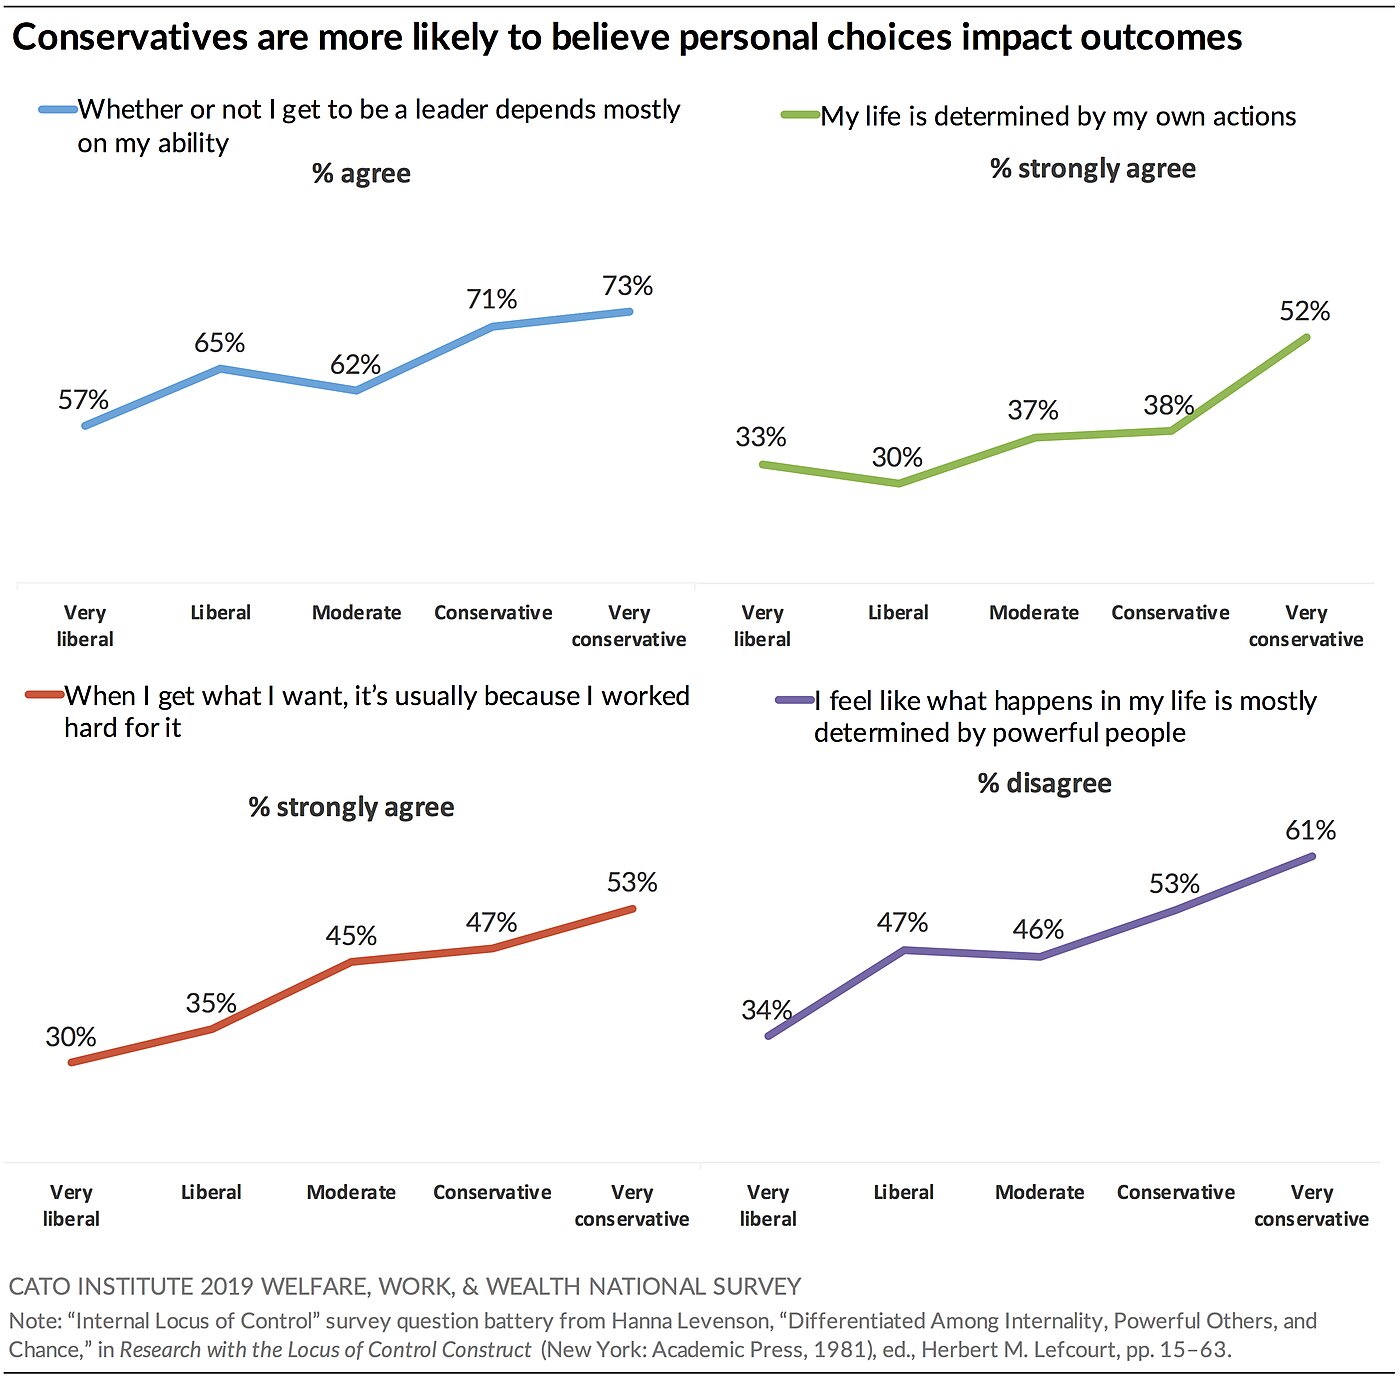 Conservatives More Likely to Believe Personal Choices Impact Outcomes